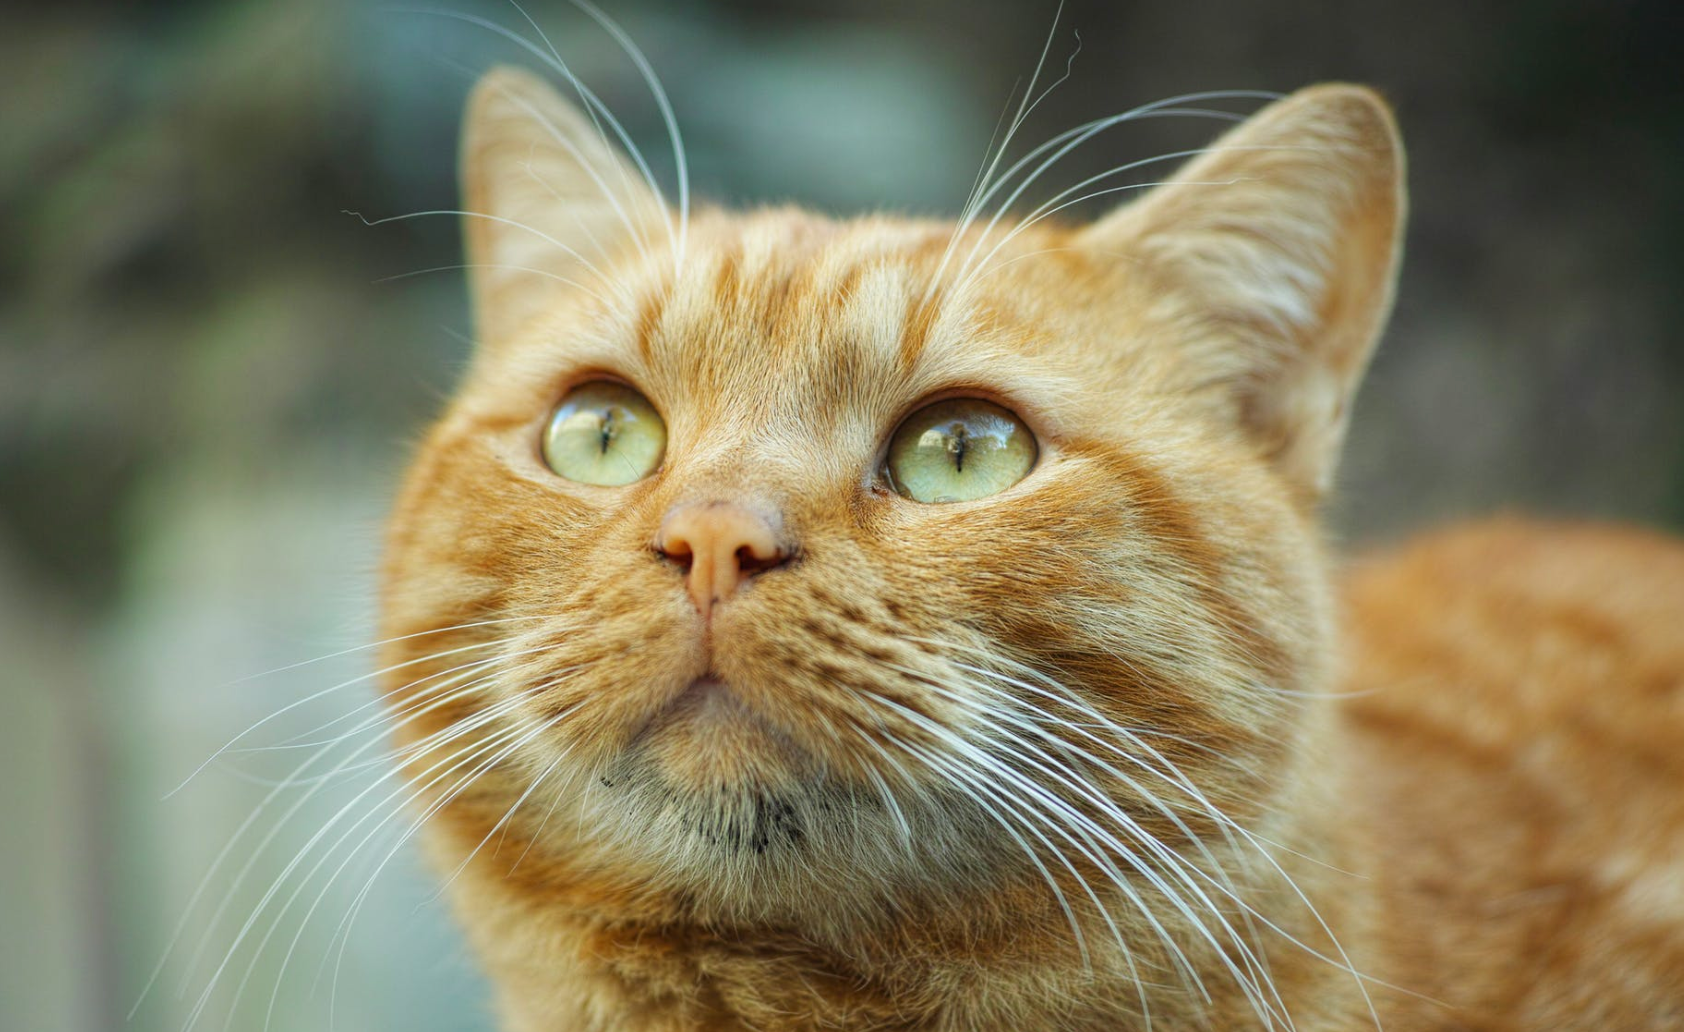 6 Fun Facts About Orange Tabby Cats Meowingtons